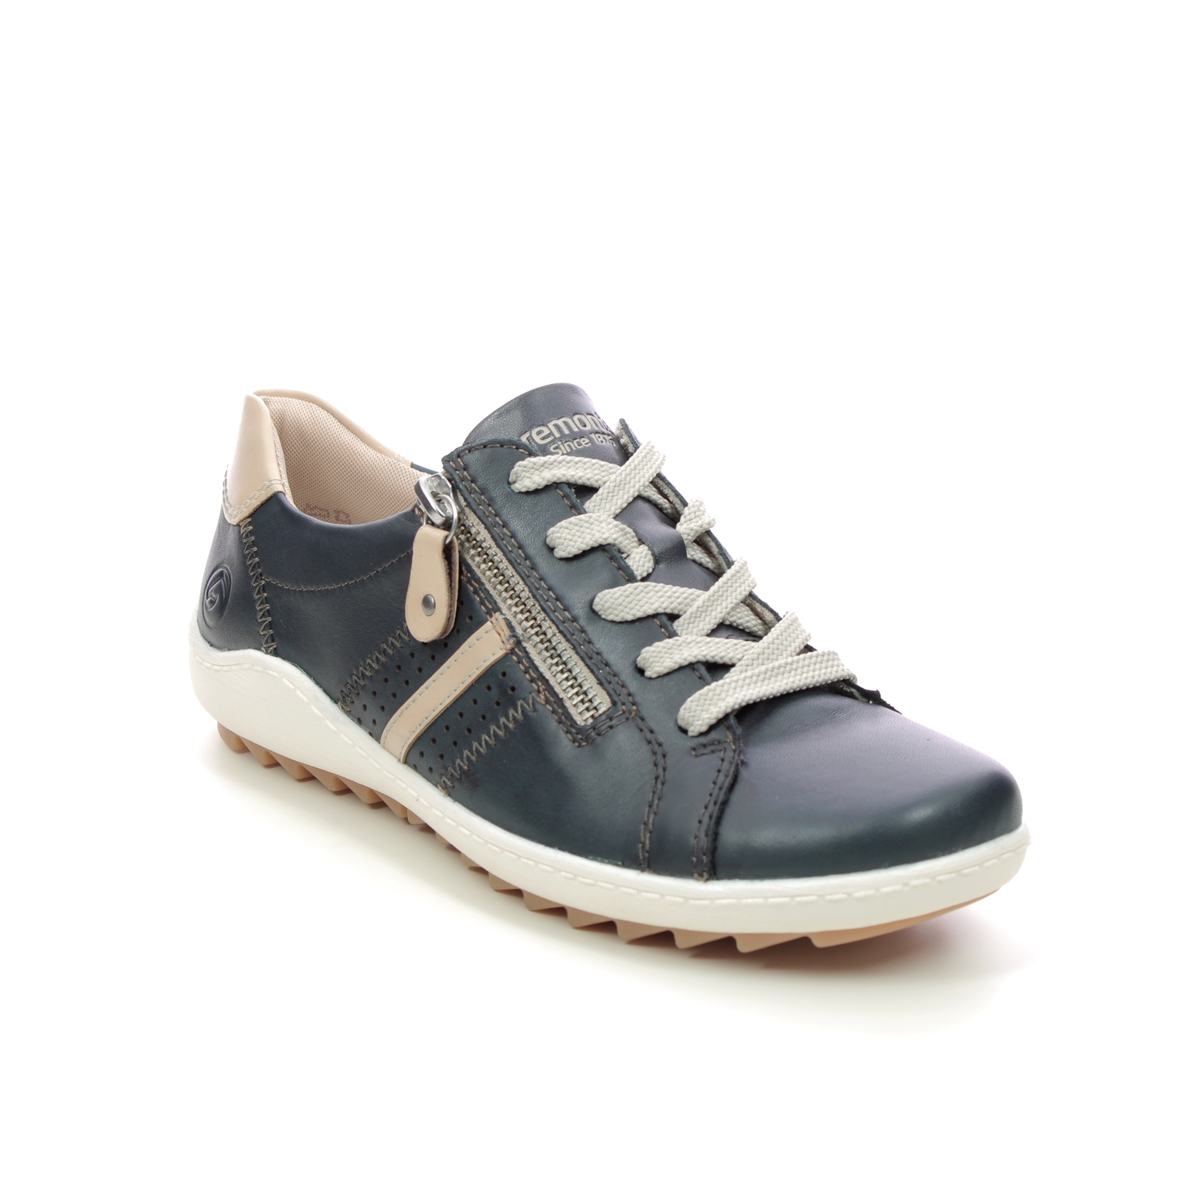 Remonte Zigzip 1 Navy Leather Womens Lacing Shoes R1432-14 In Size 41 In Plain Navy Leather